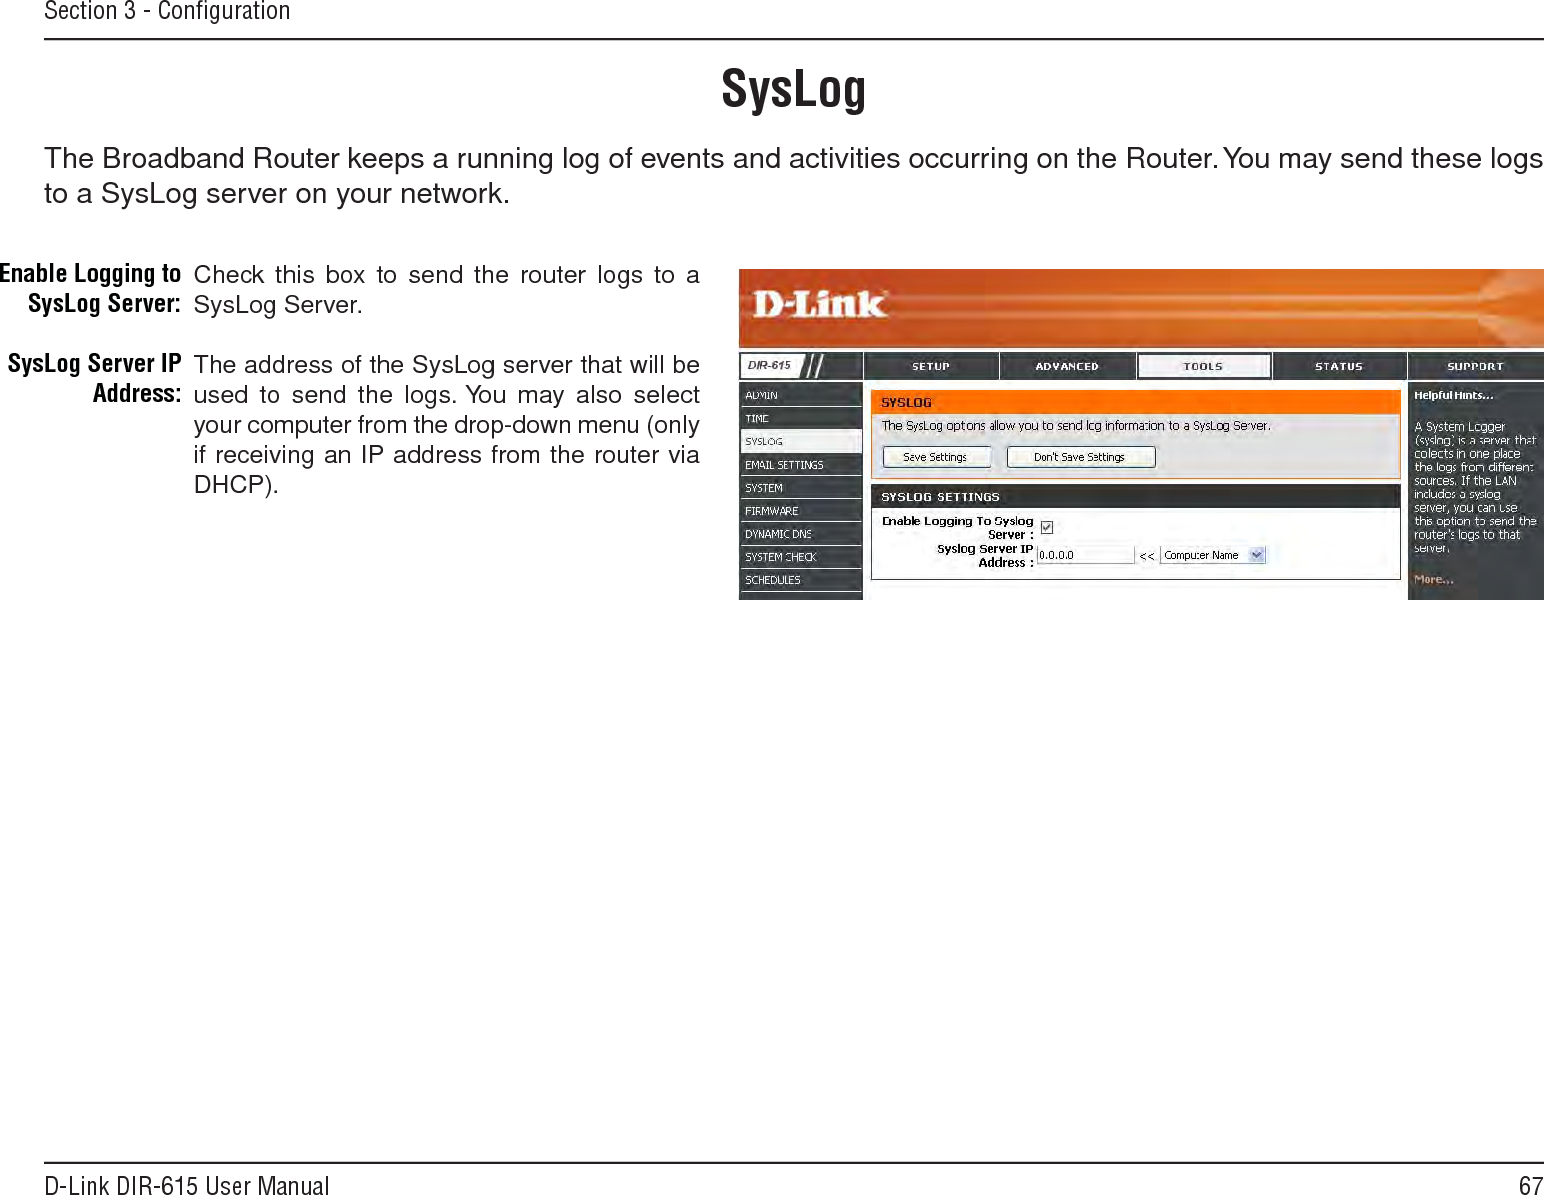 67D-Link DIR-615 User ManualSection 3 - ConﬁgurationSysLogThe Broadband Router keeps a running log of events and activities occurring on the Router. You may send these logs to a SysLog server on your network.Enable Logging to SysLog Server:SysLog Server IP Address:Check this box to send the router logs to a SysLog Server.The address of the SysLog server that will be used to send the logs. You may  also  select your computer from the drop-down menu (only if receiving an IP address from the router via DHCP).